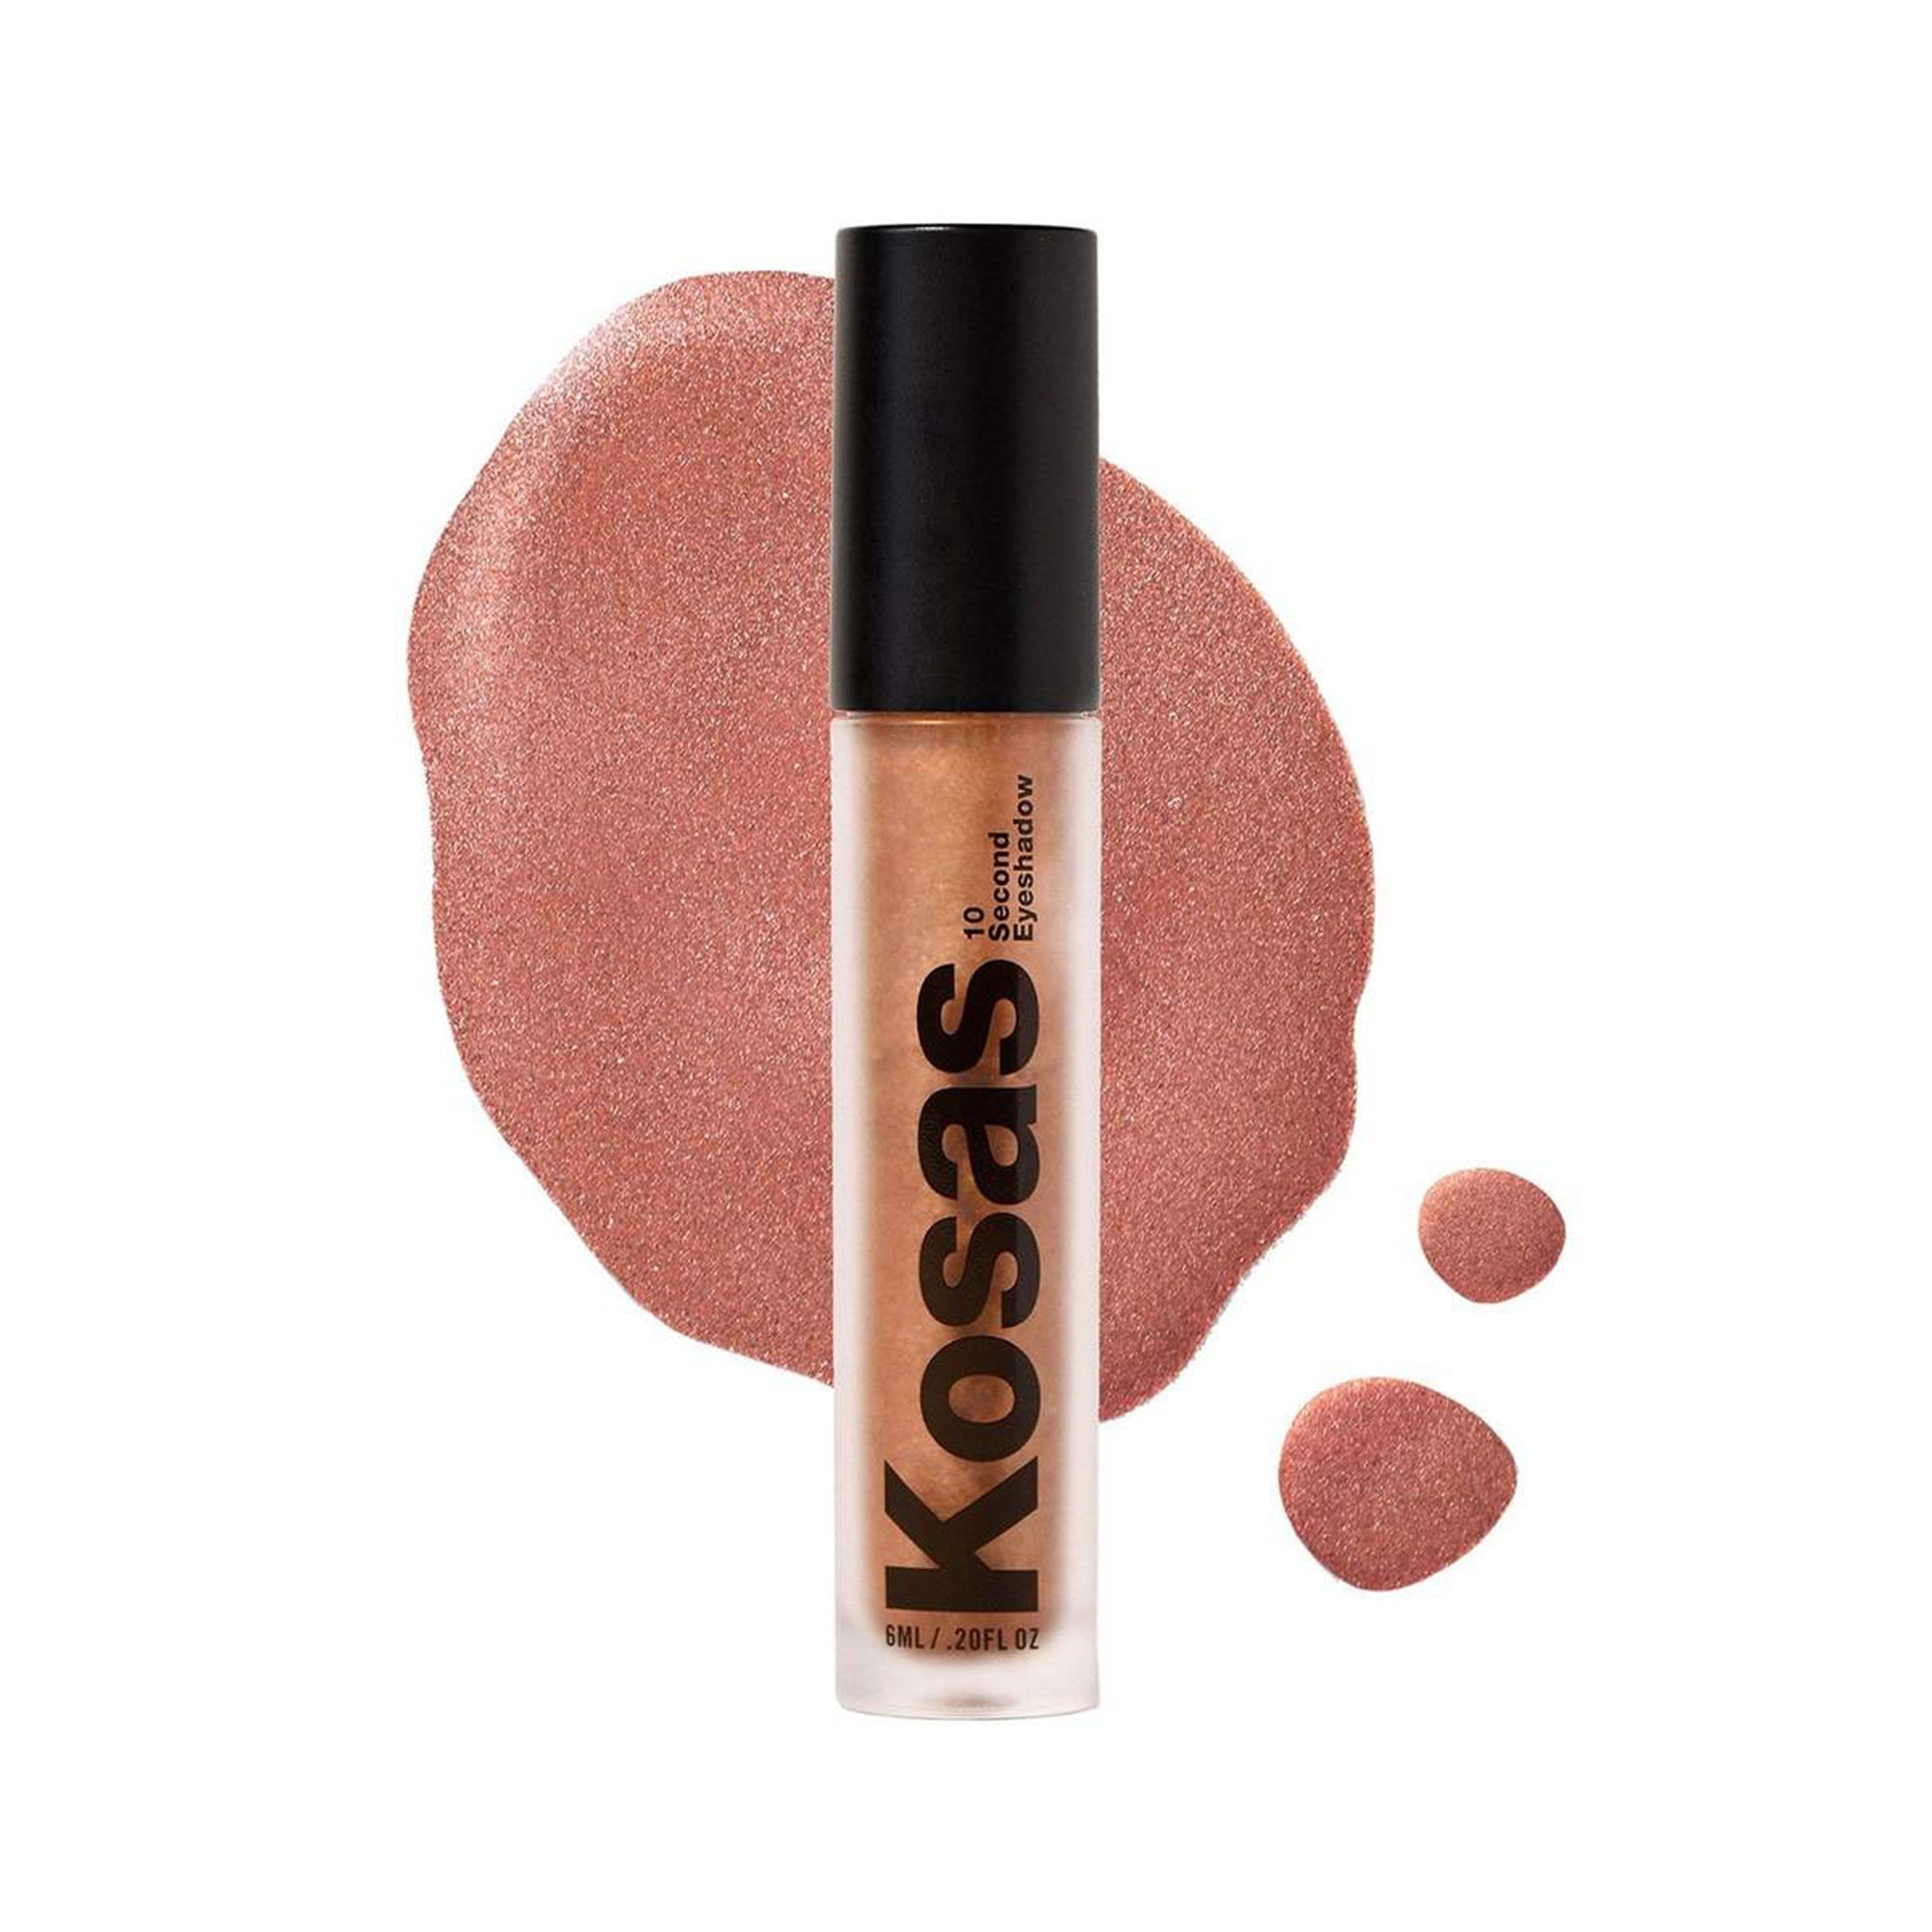 Kosas 10 Second Shadow Makes Eye Makeup So Simple — Review